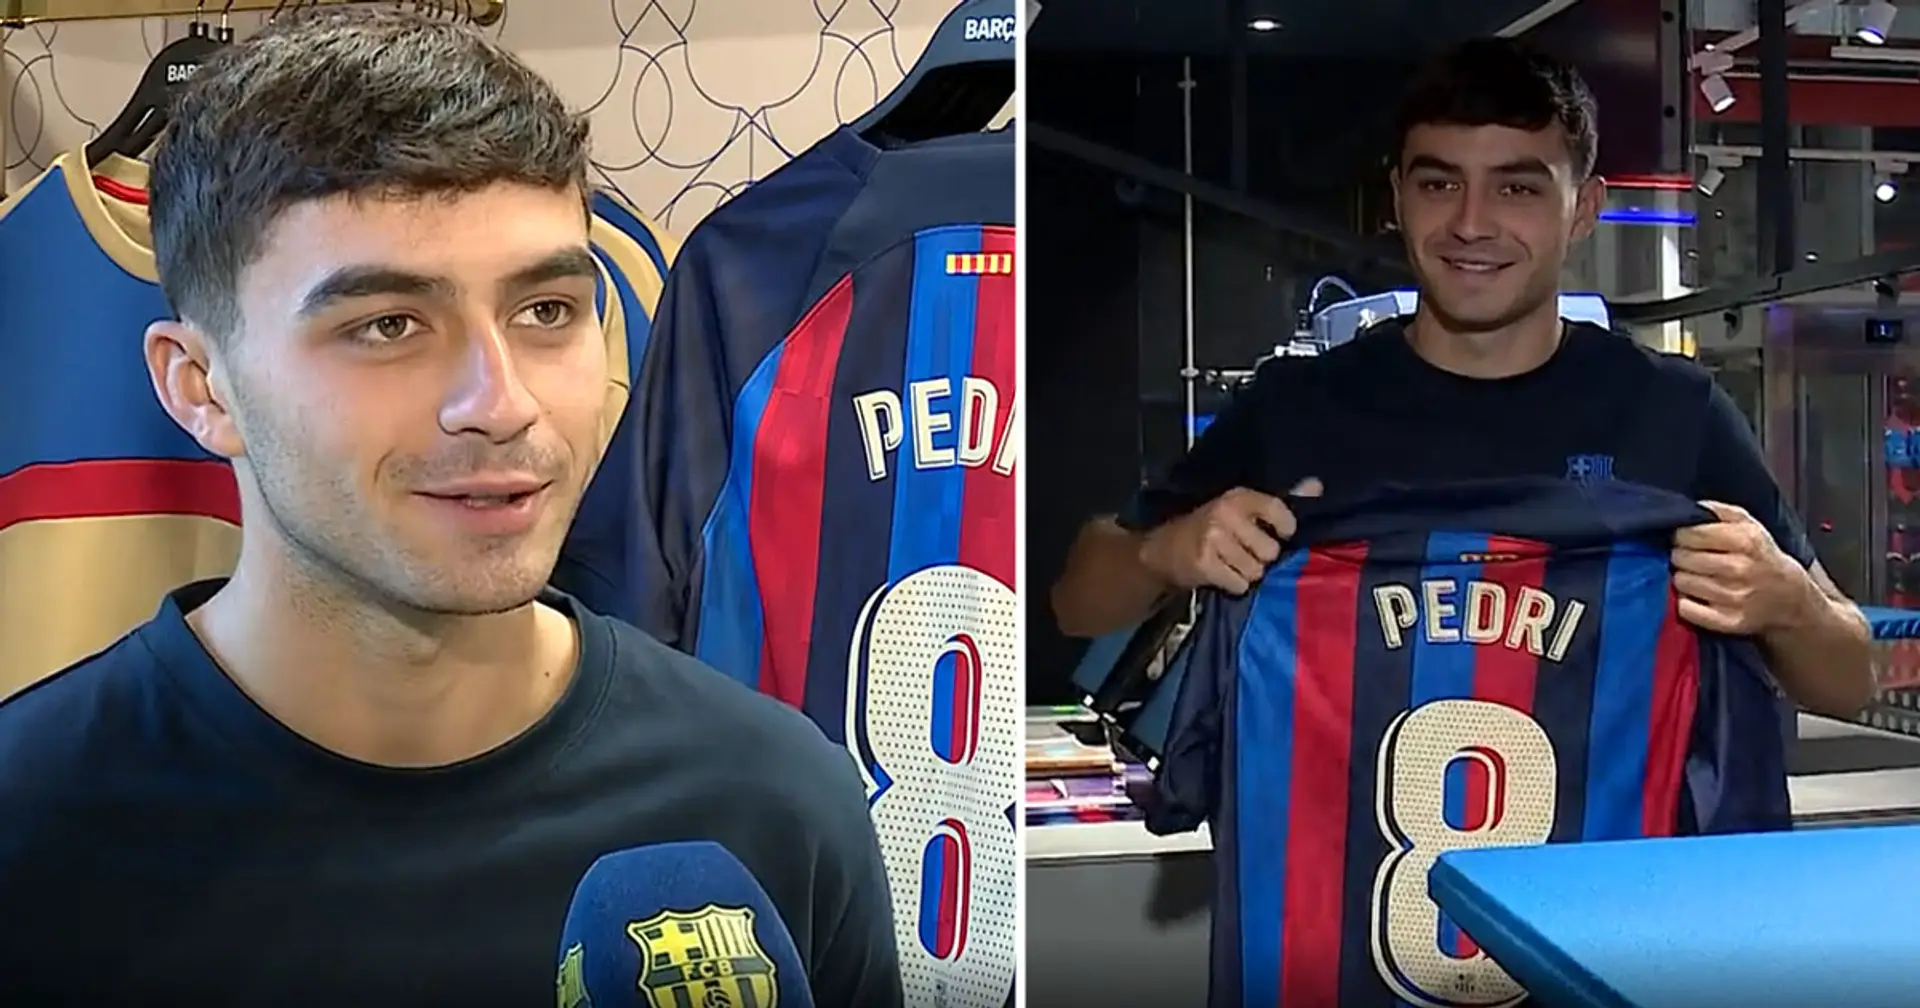 'It's always been the number I wanted to have at Barca': Pedri reacts to new jersey number